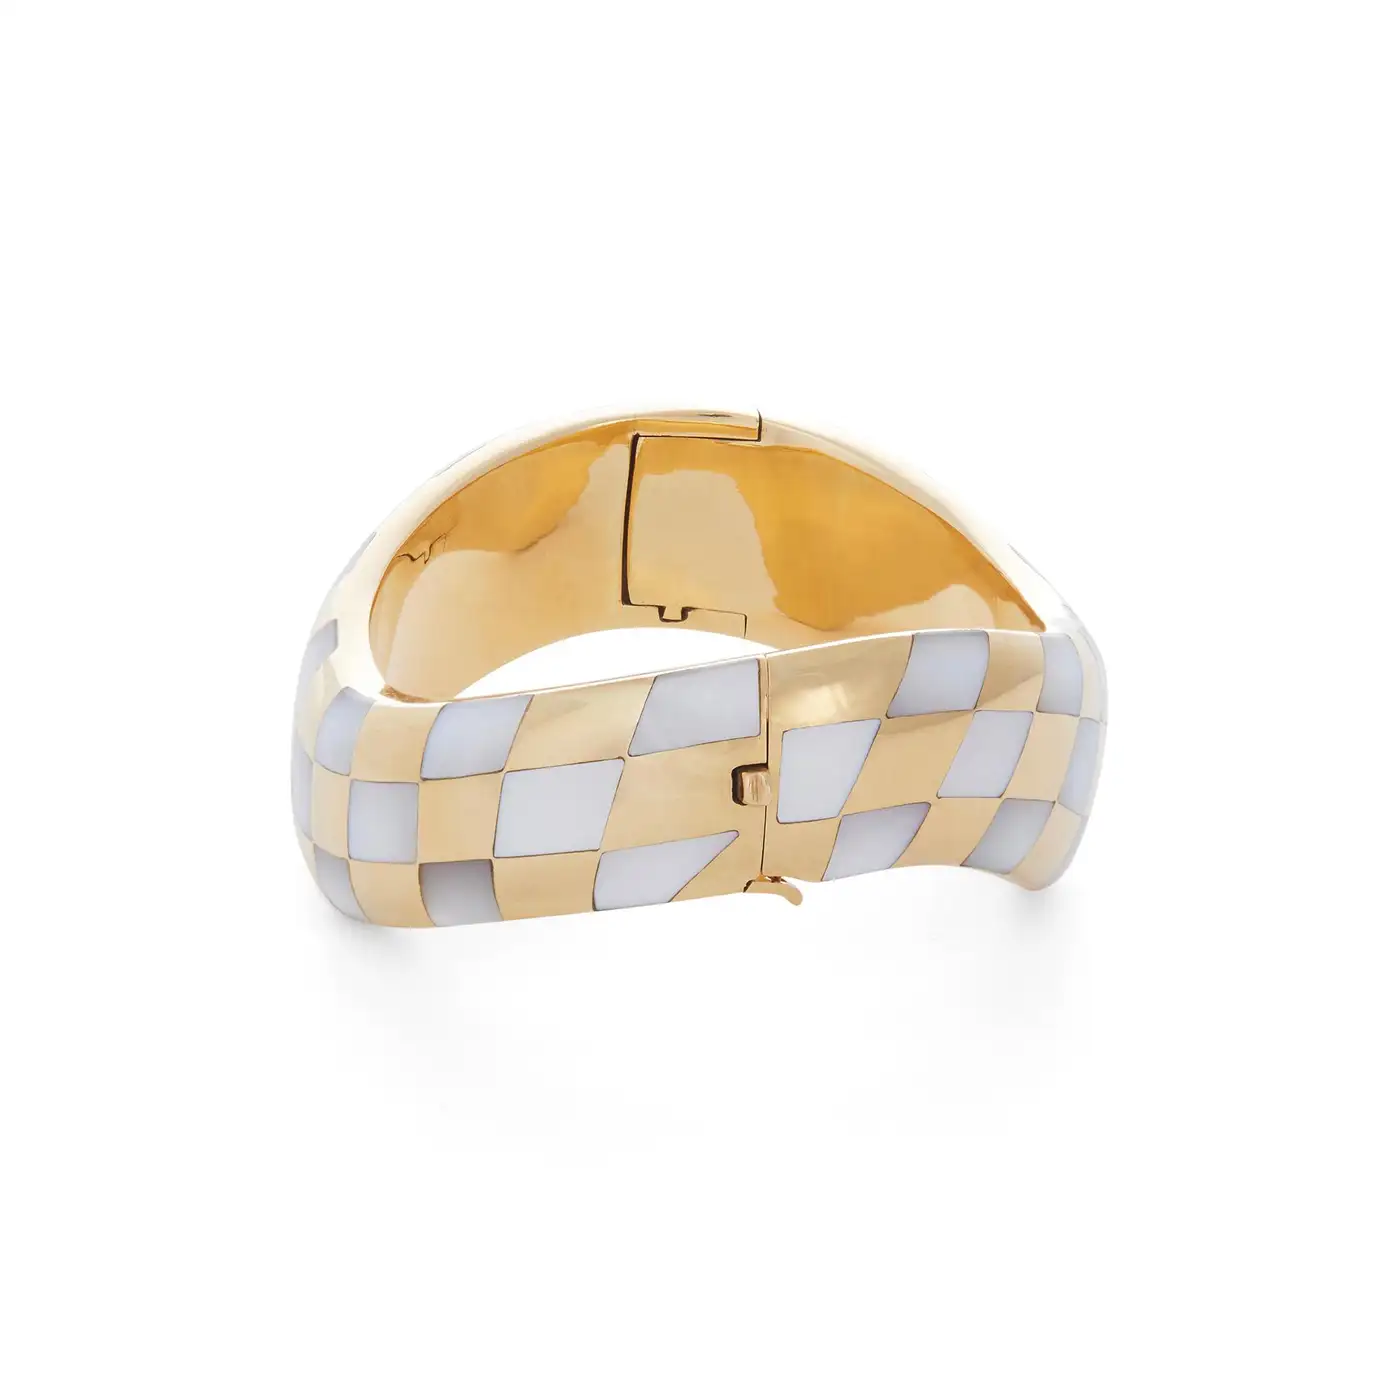 Angela-Cummings-Gold-and-Mother-or-Pearl-Bangle-5.webp